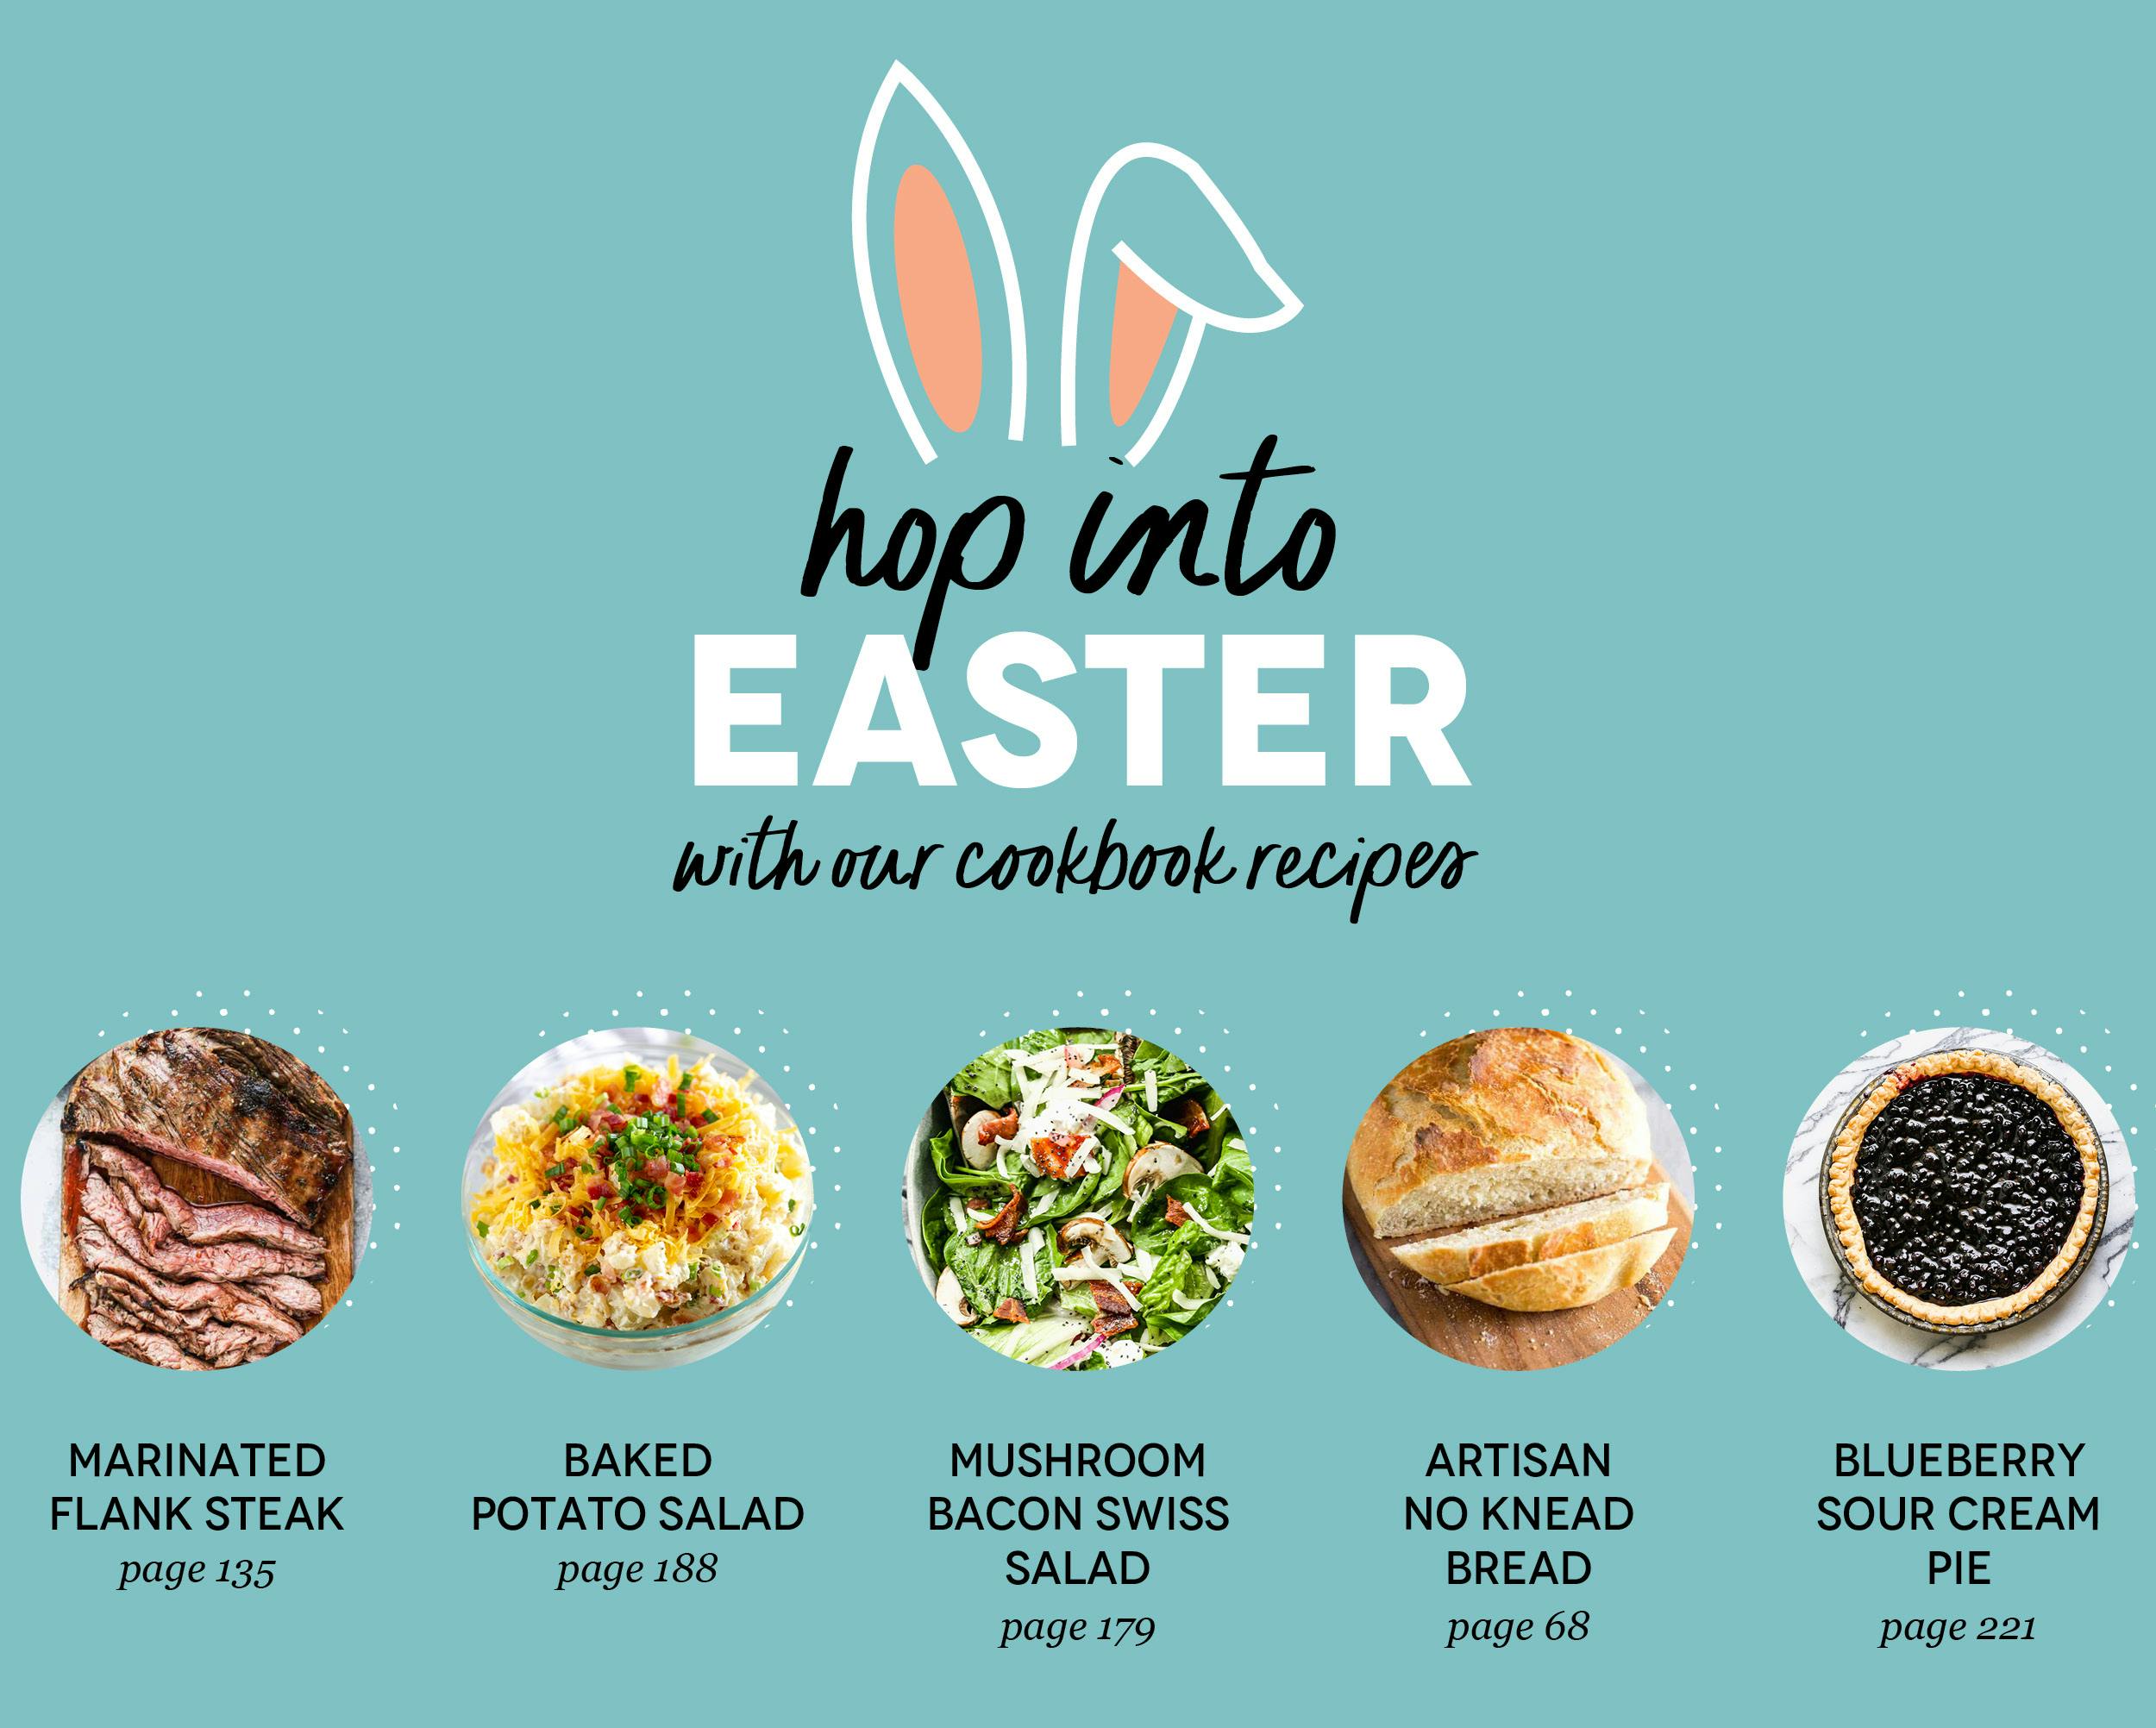 Hop into Easter with our cookbook recipes! Marinated Flank Steak, Baked Potato Salad, Mushroom Bacon Swiss Salad, Artisan Bread, and Blueberry Sour Cream Pie 